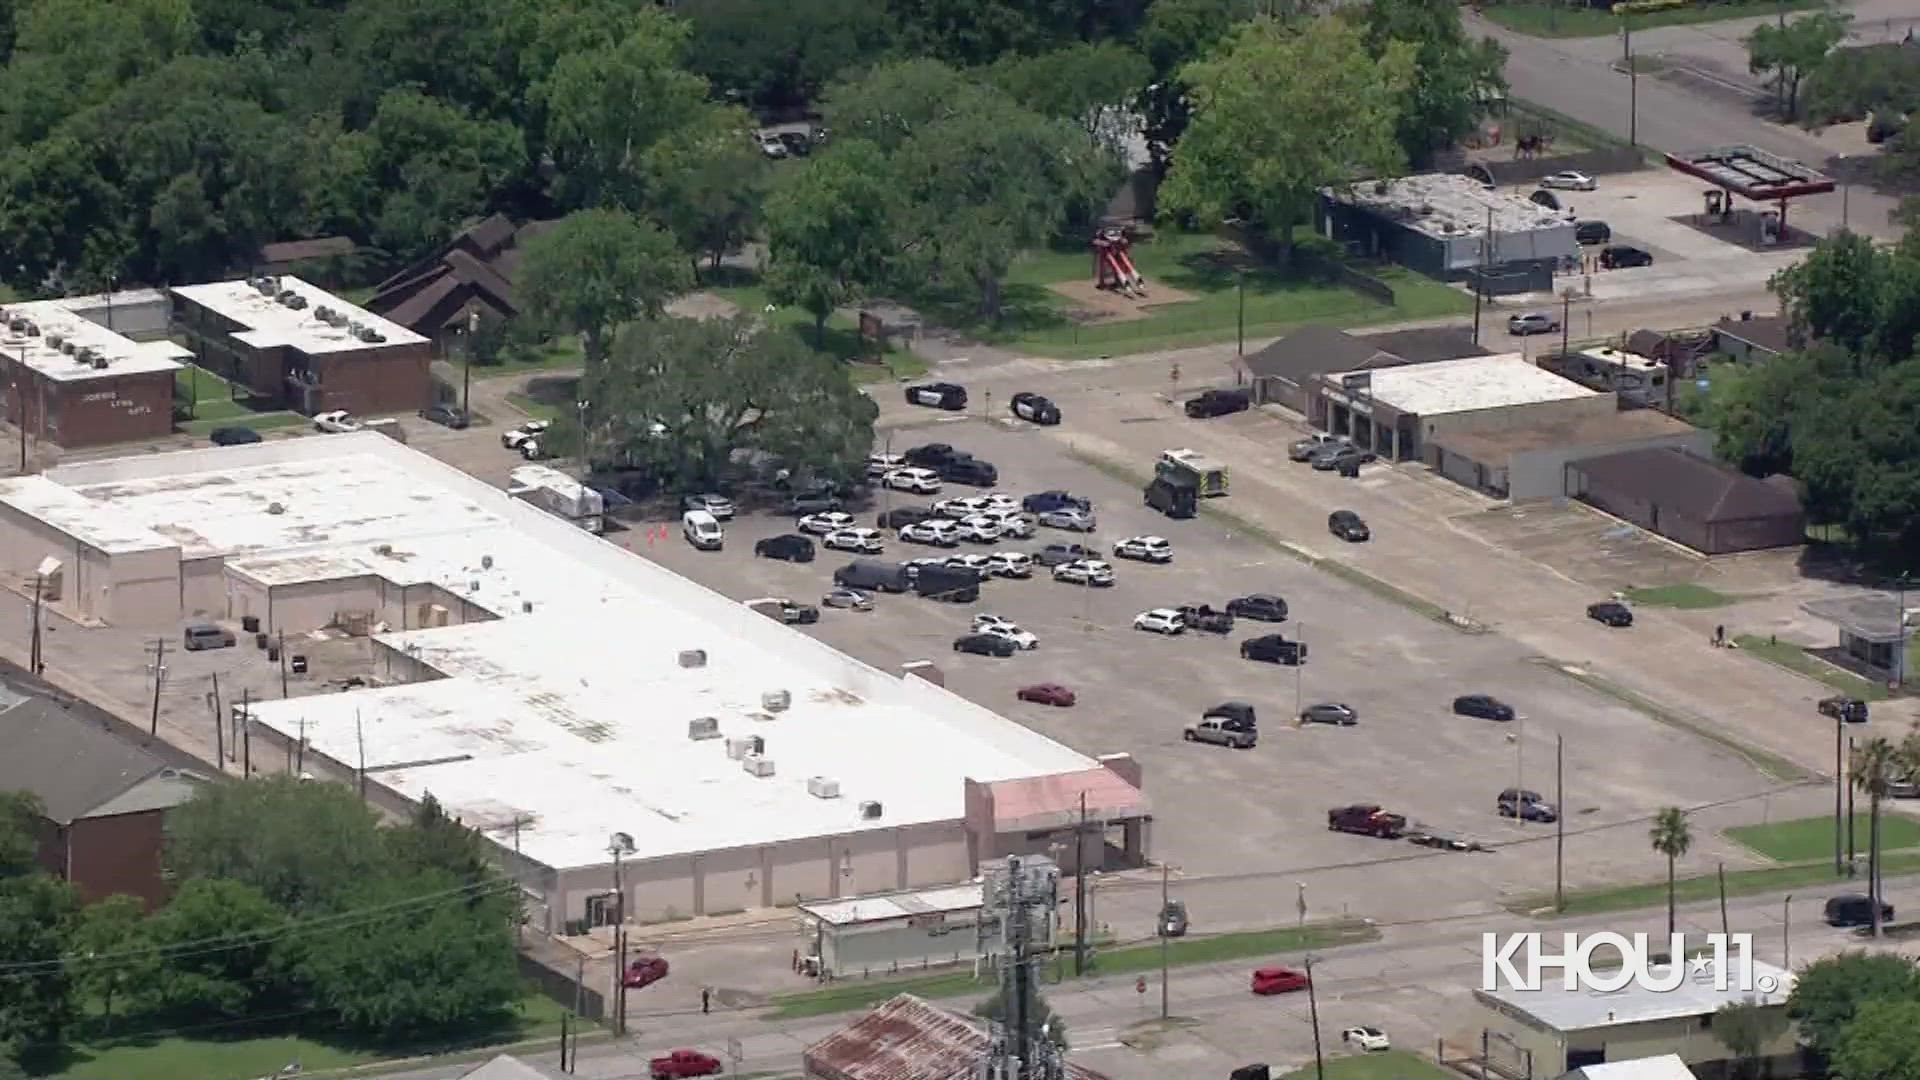 Air 11 video shows dozens of police cruisers and a mobile command post that was set up Thursday in an area that was blocked off to traffic.